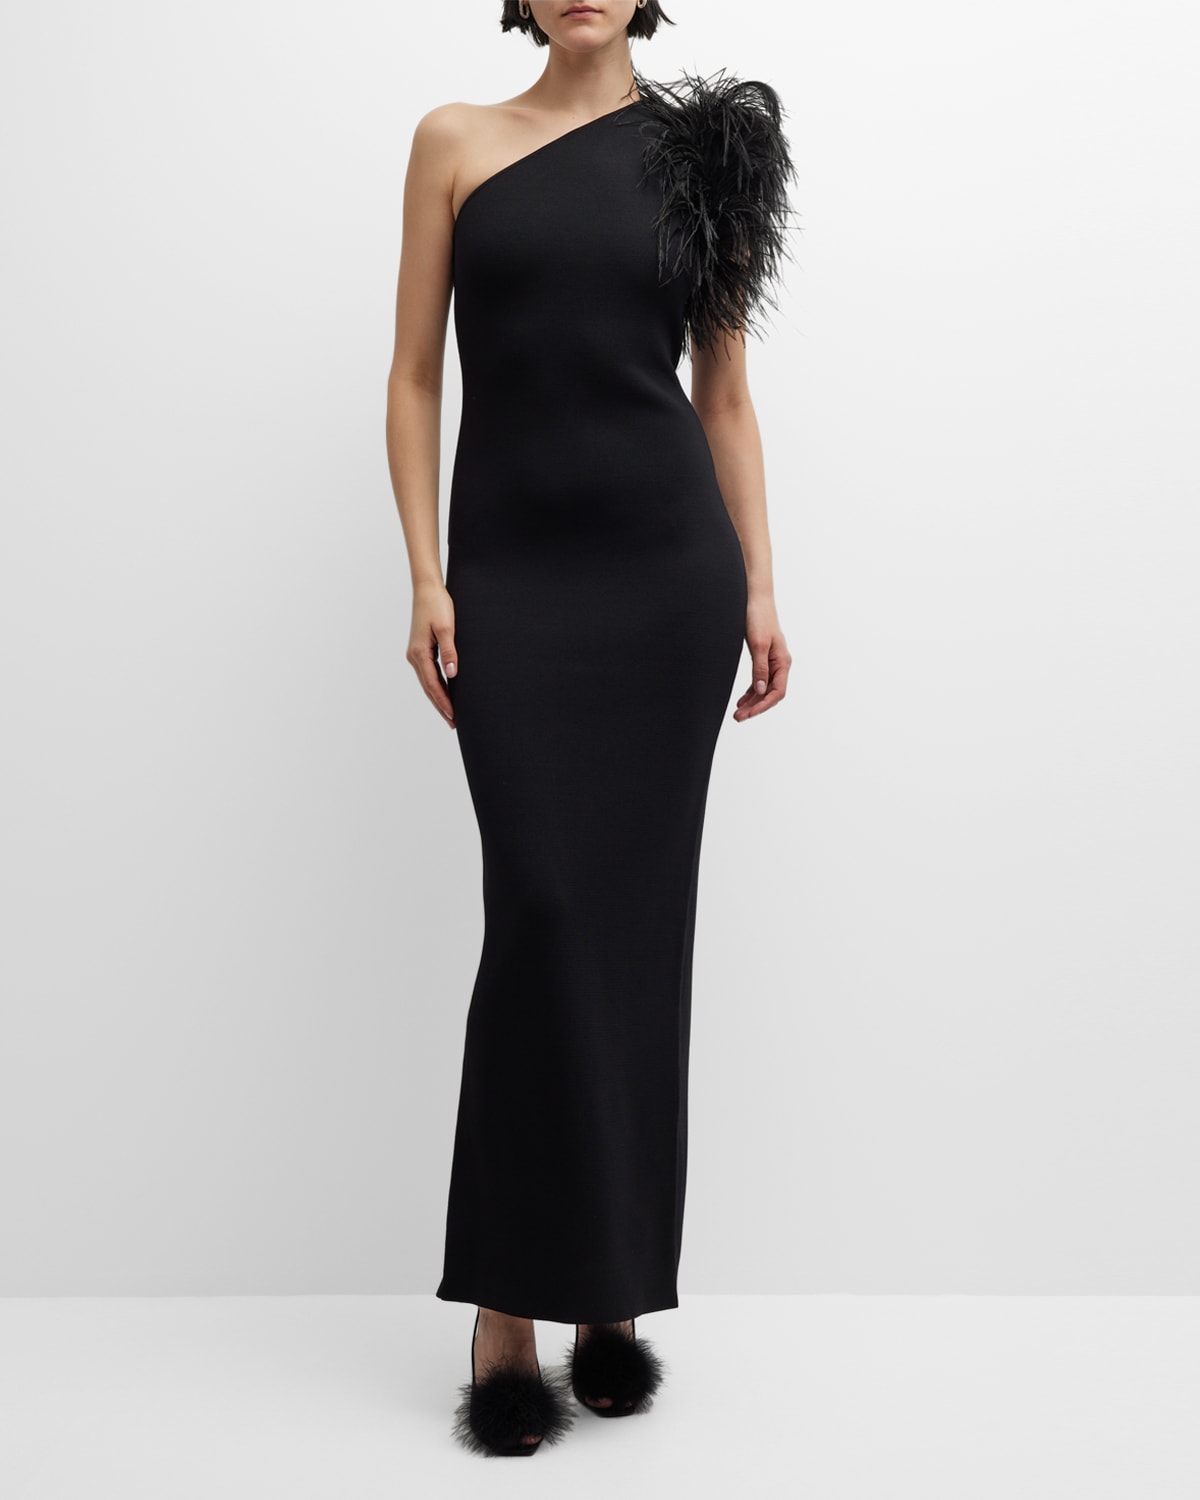 Elcie One-Shoulder Column Gown with Feathers